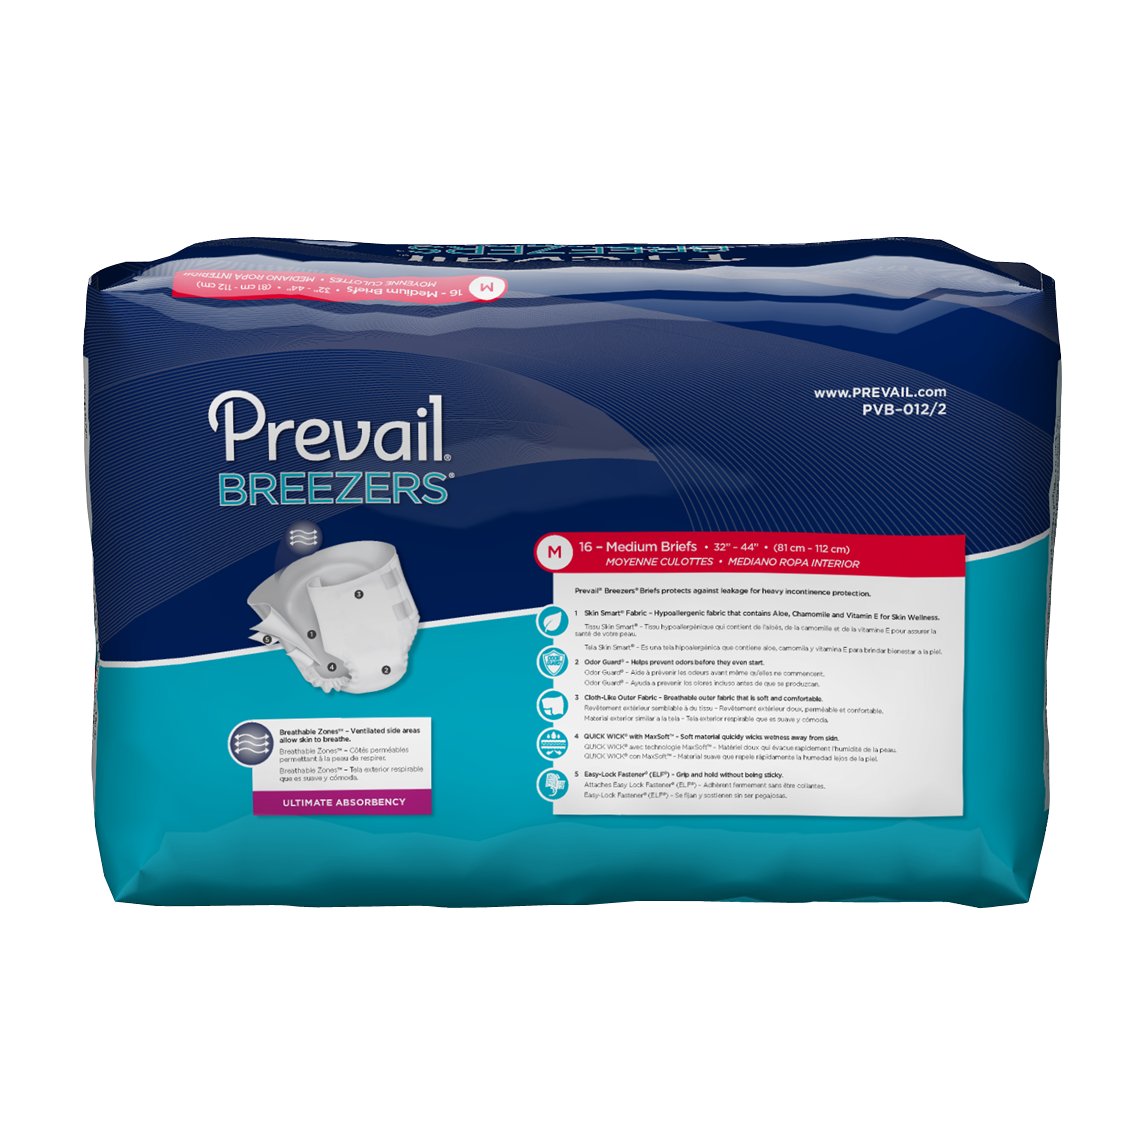 Prevail Extra Absorbency Underwear, Medium, 20-Count (Pack of 4